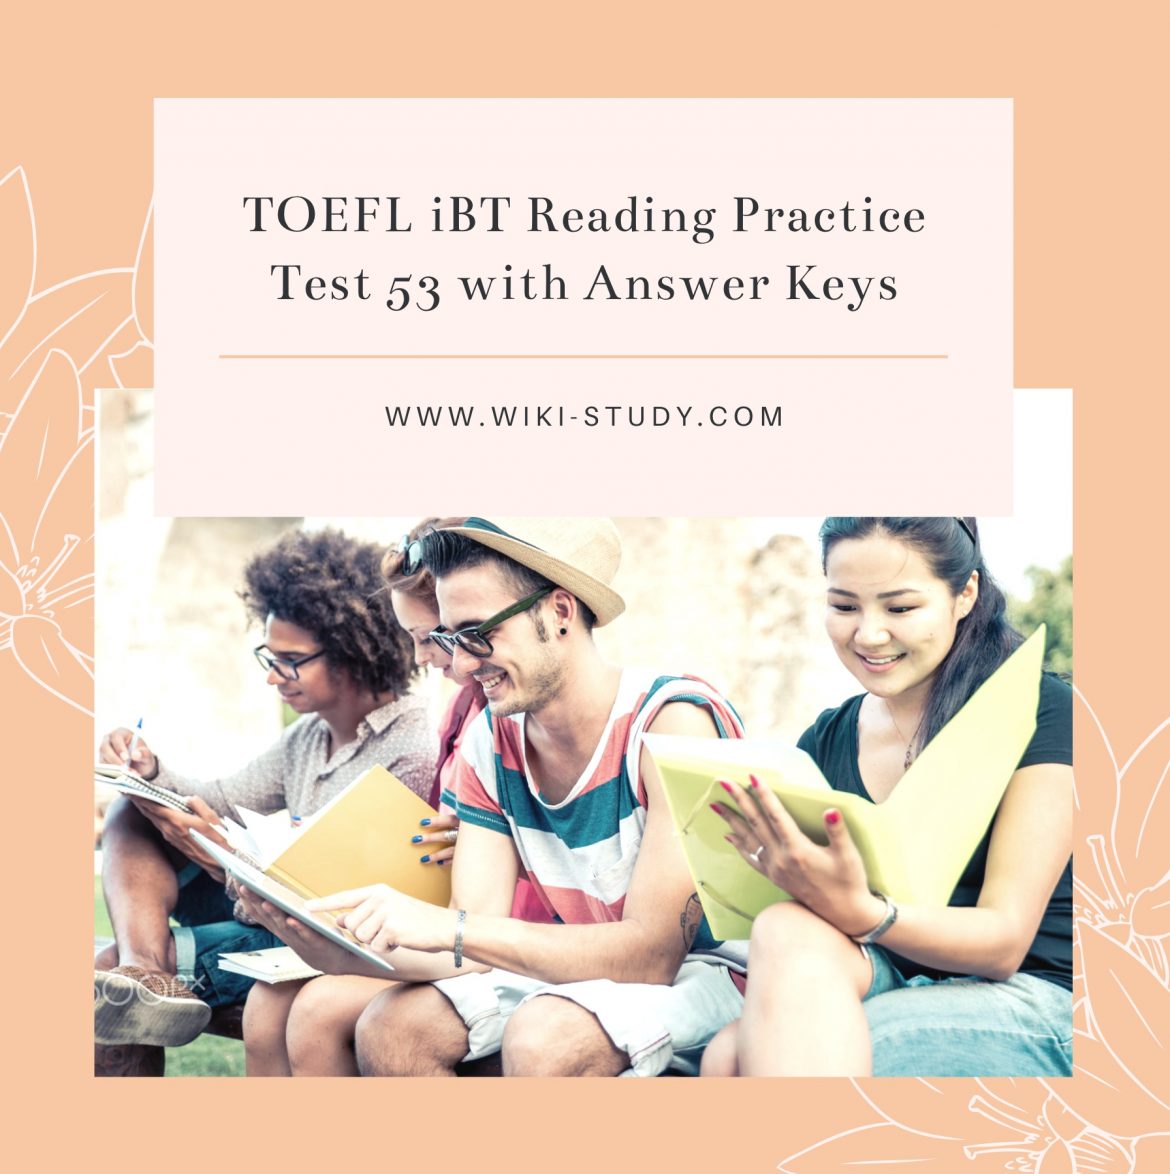 Toefl Ibt Reading Practice Test 53 From The Official Guide To The Toefl Test Tv Acres 2423